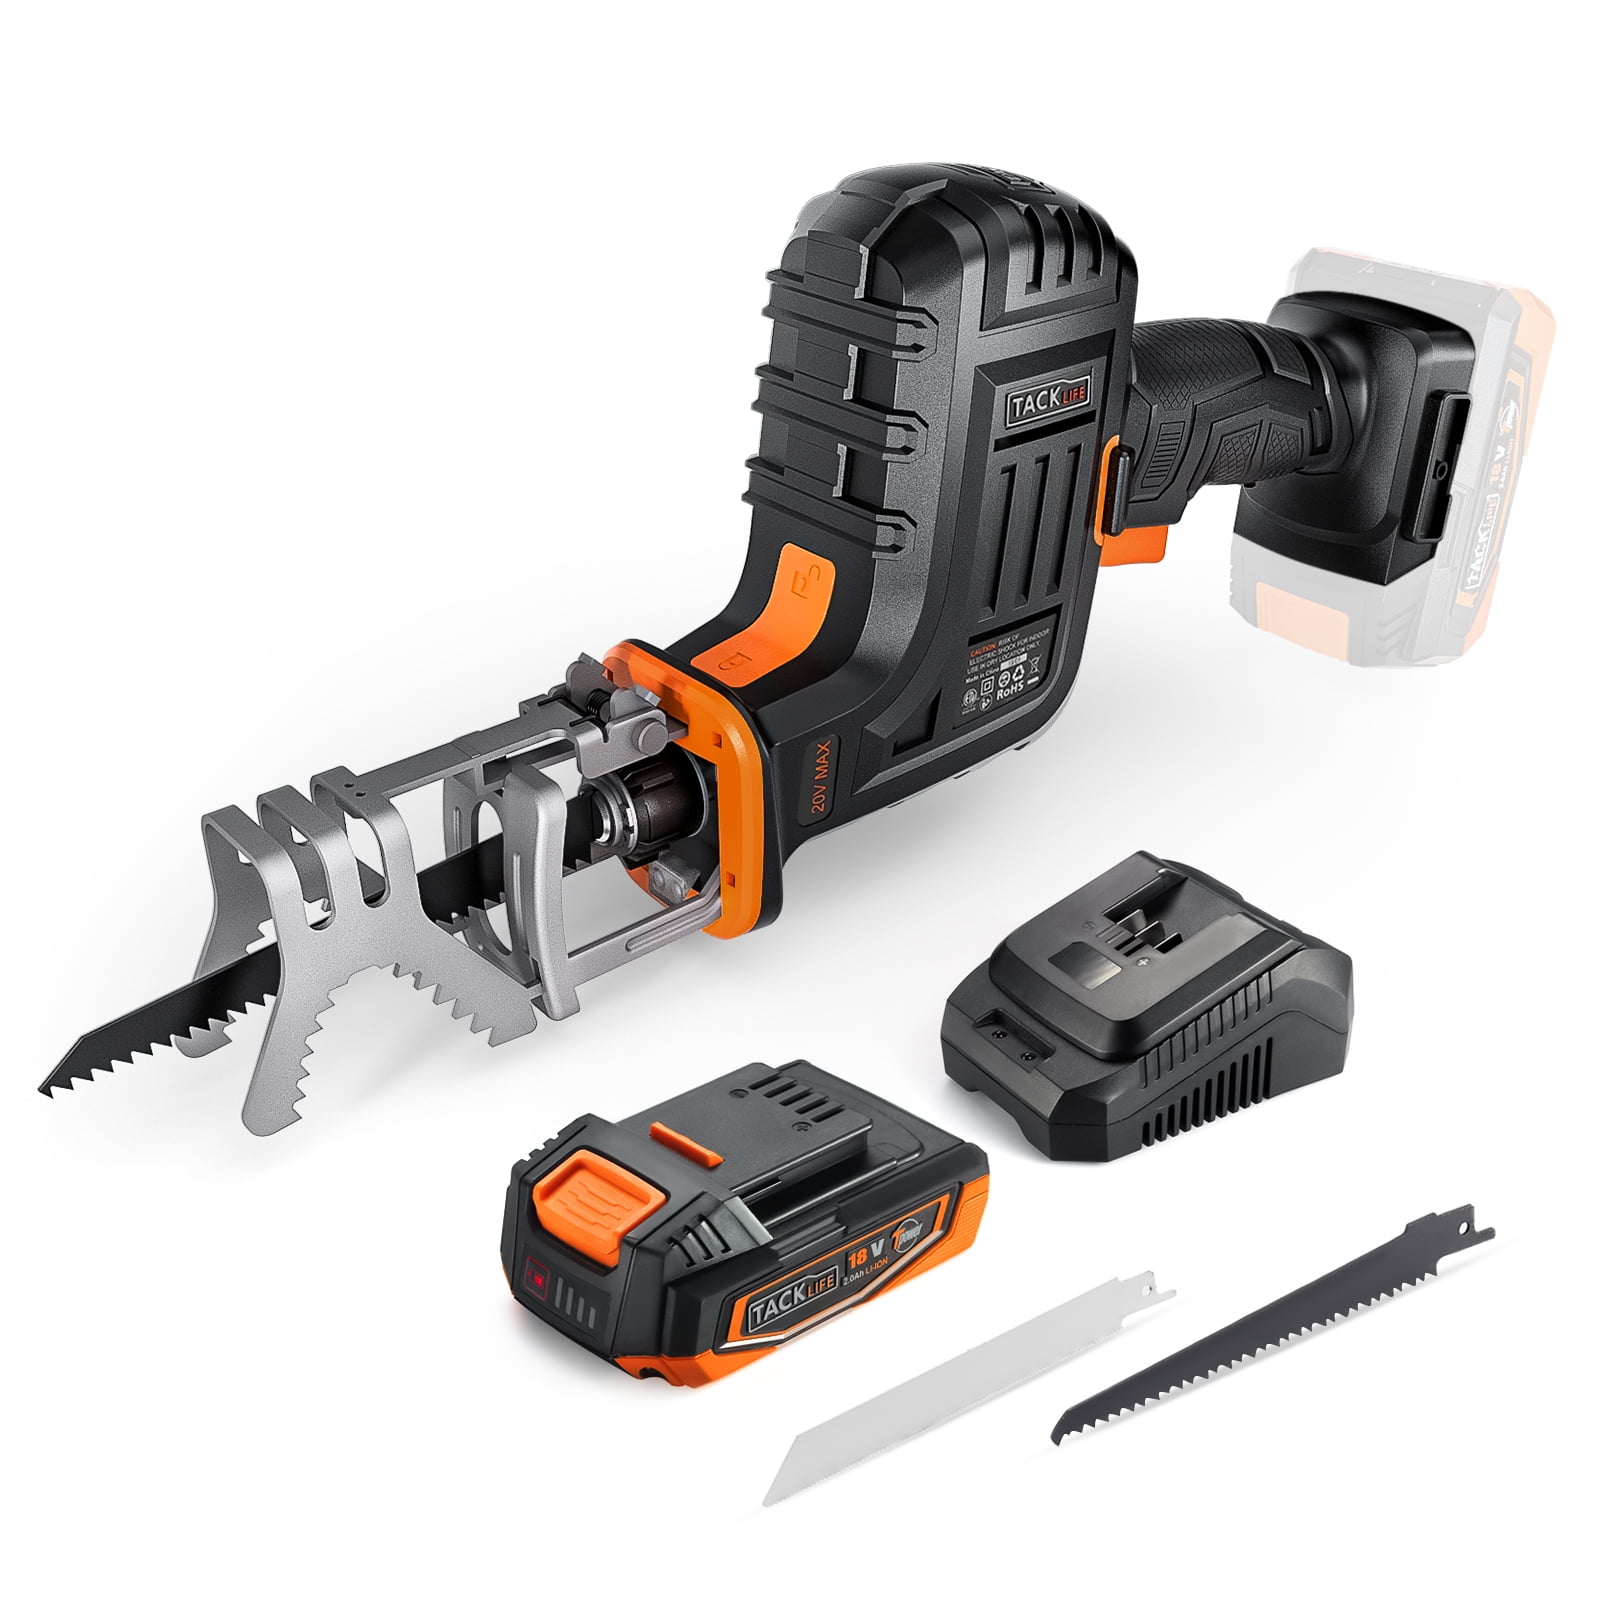 Genesis GLRS20A 20-Volt Li-Ion Variable-Speed Reciprocating Saw with Battery,  Charger, and Blades